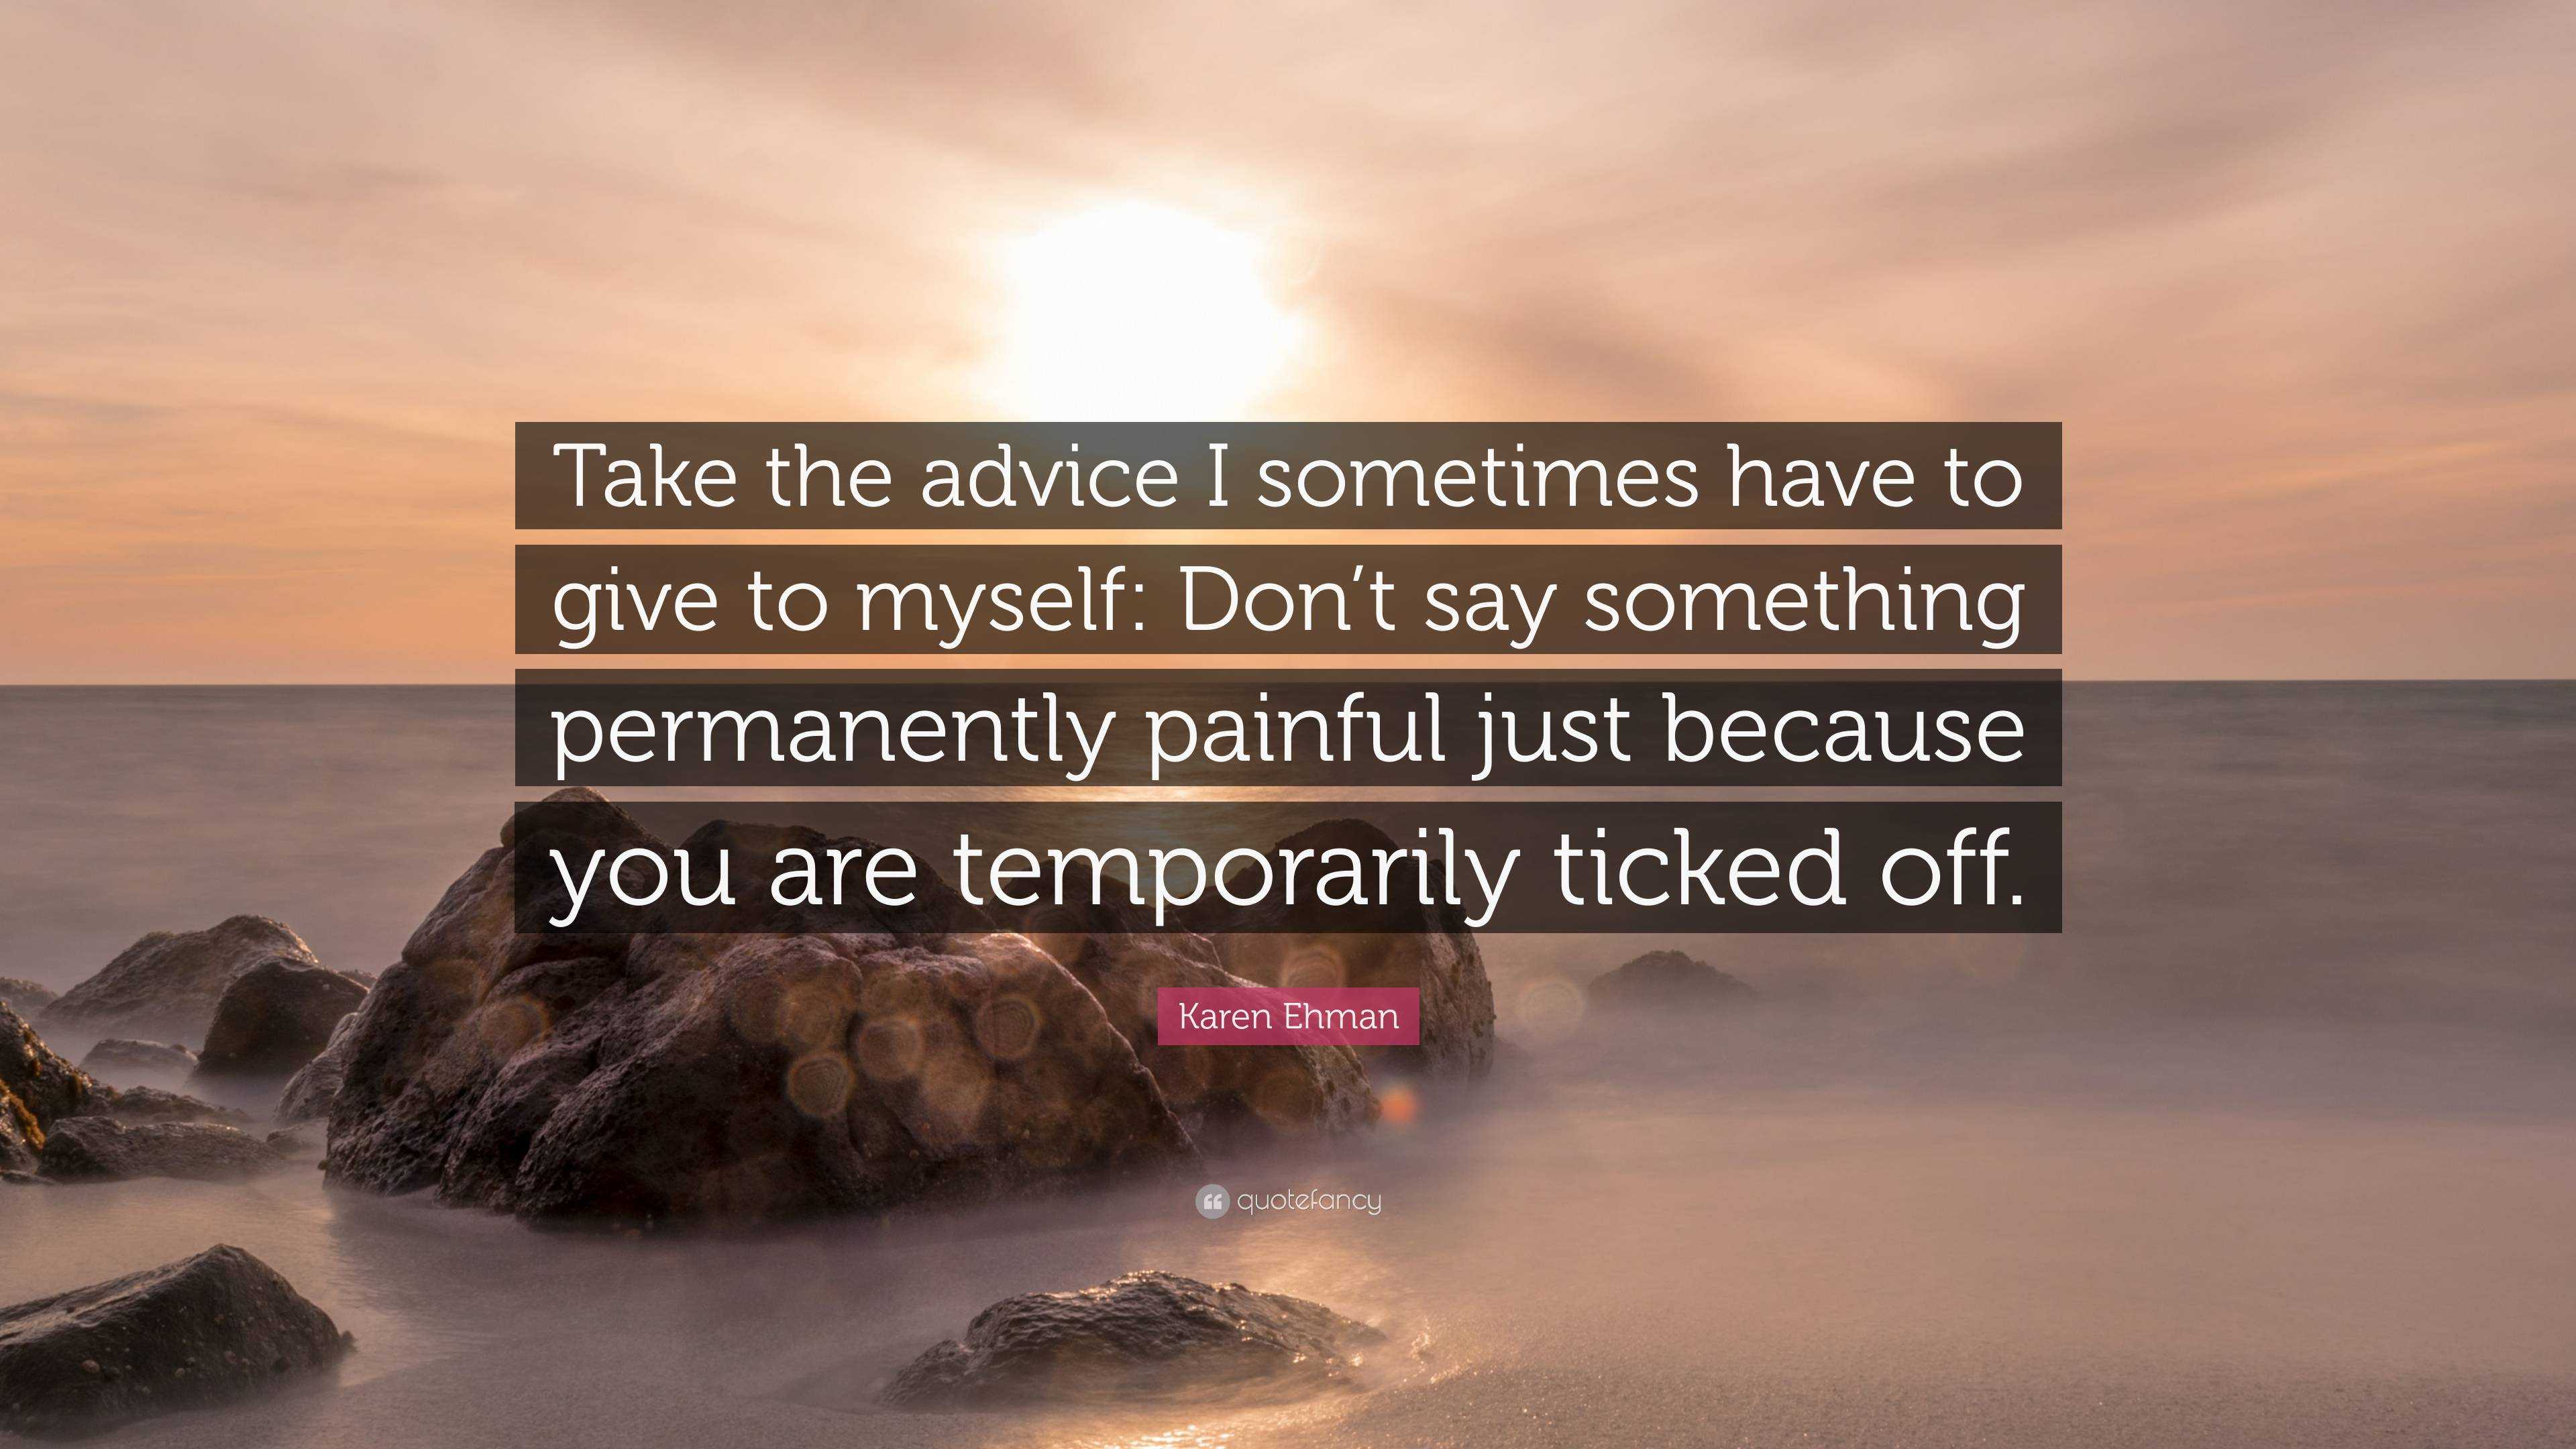 Karen Ehman Quote “take The Advice I Sometimes Have To Give To Myself Dont Say Something